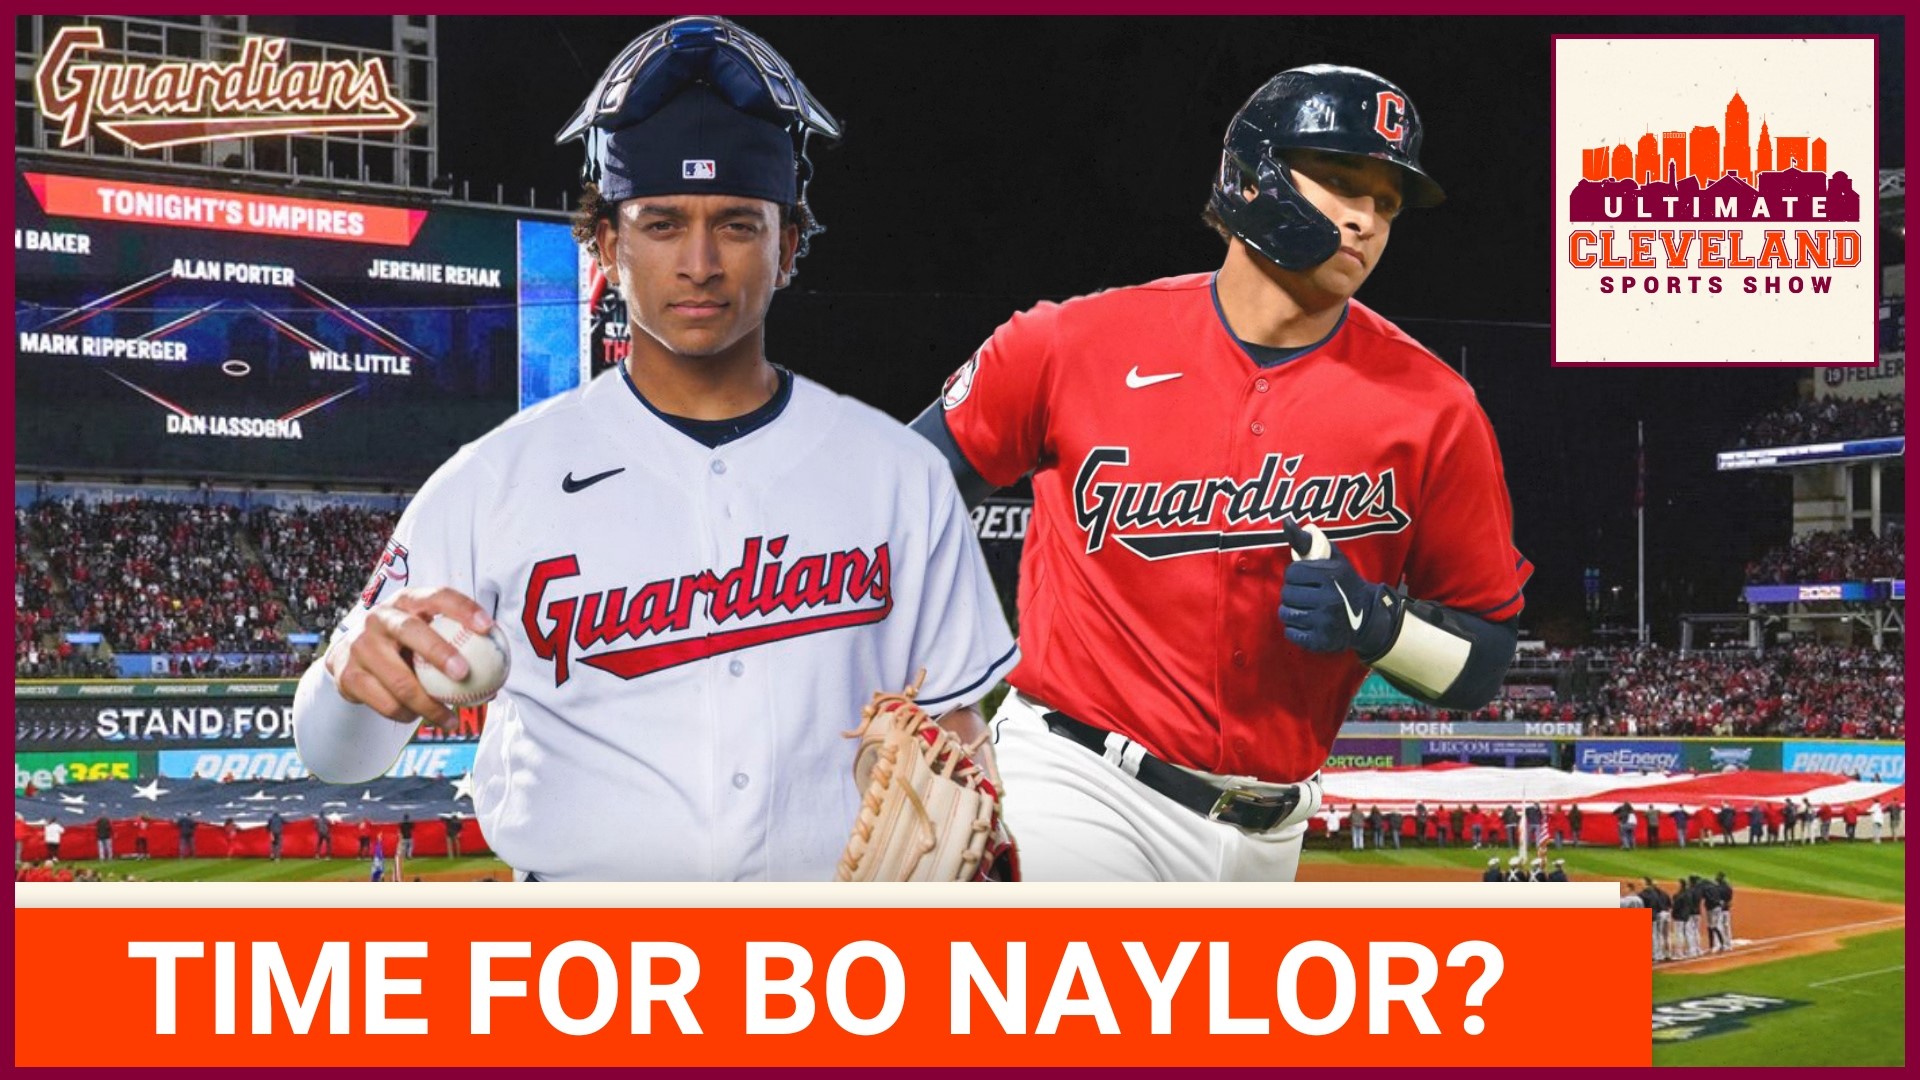 How long before we see prospect Bo Naylor in the Guardians Major League lineup?